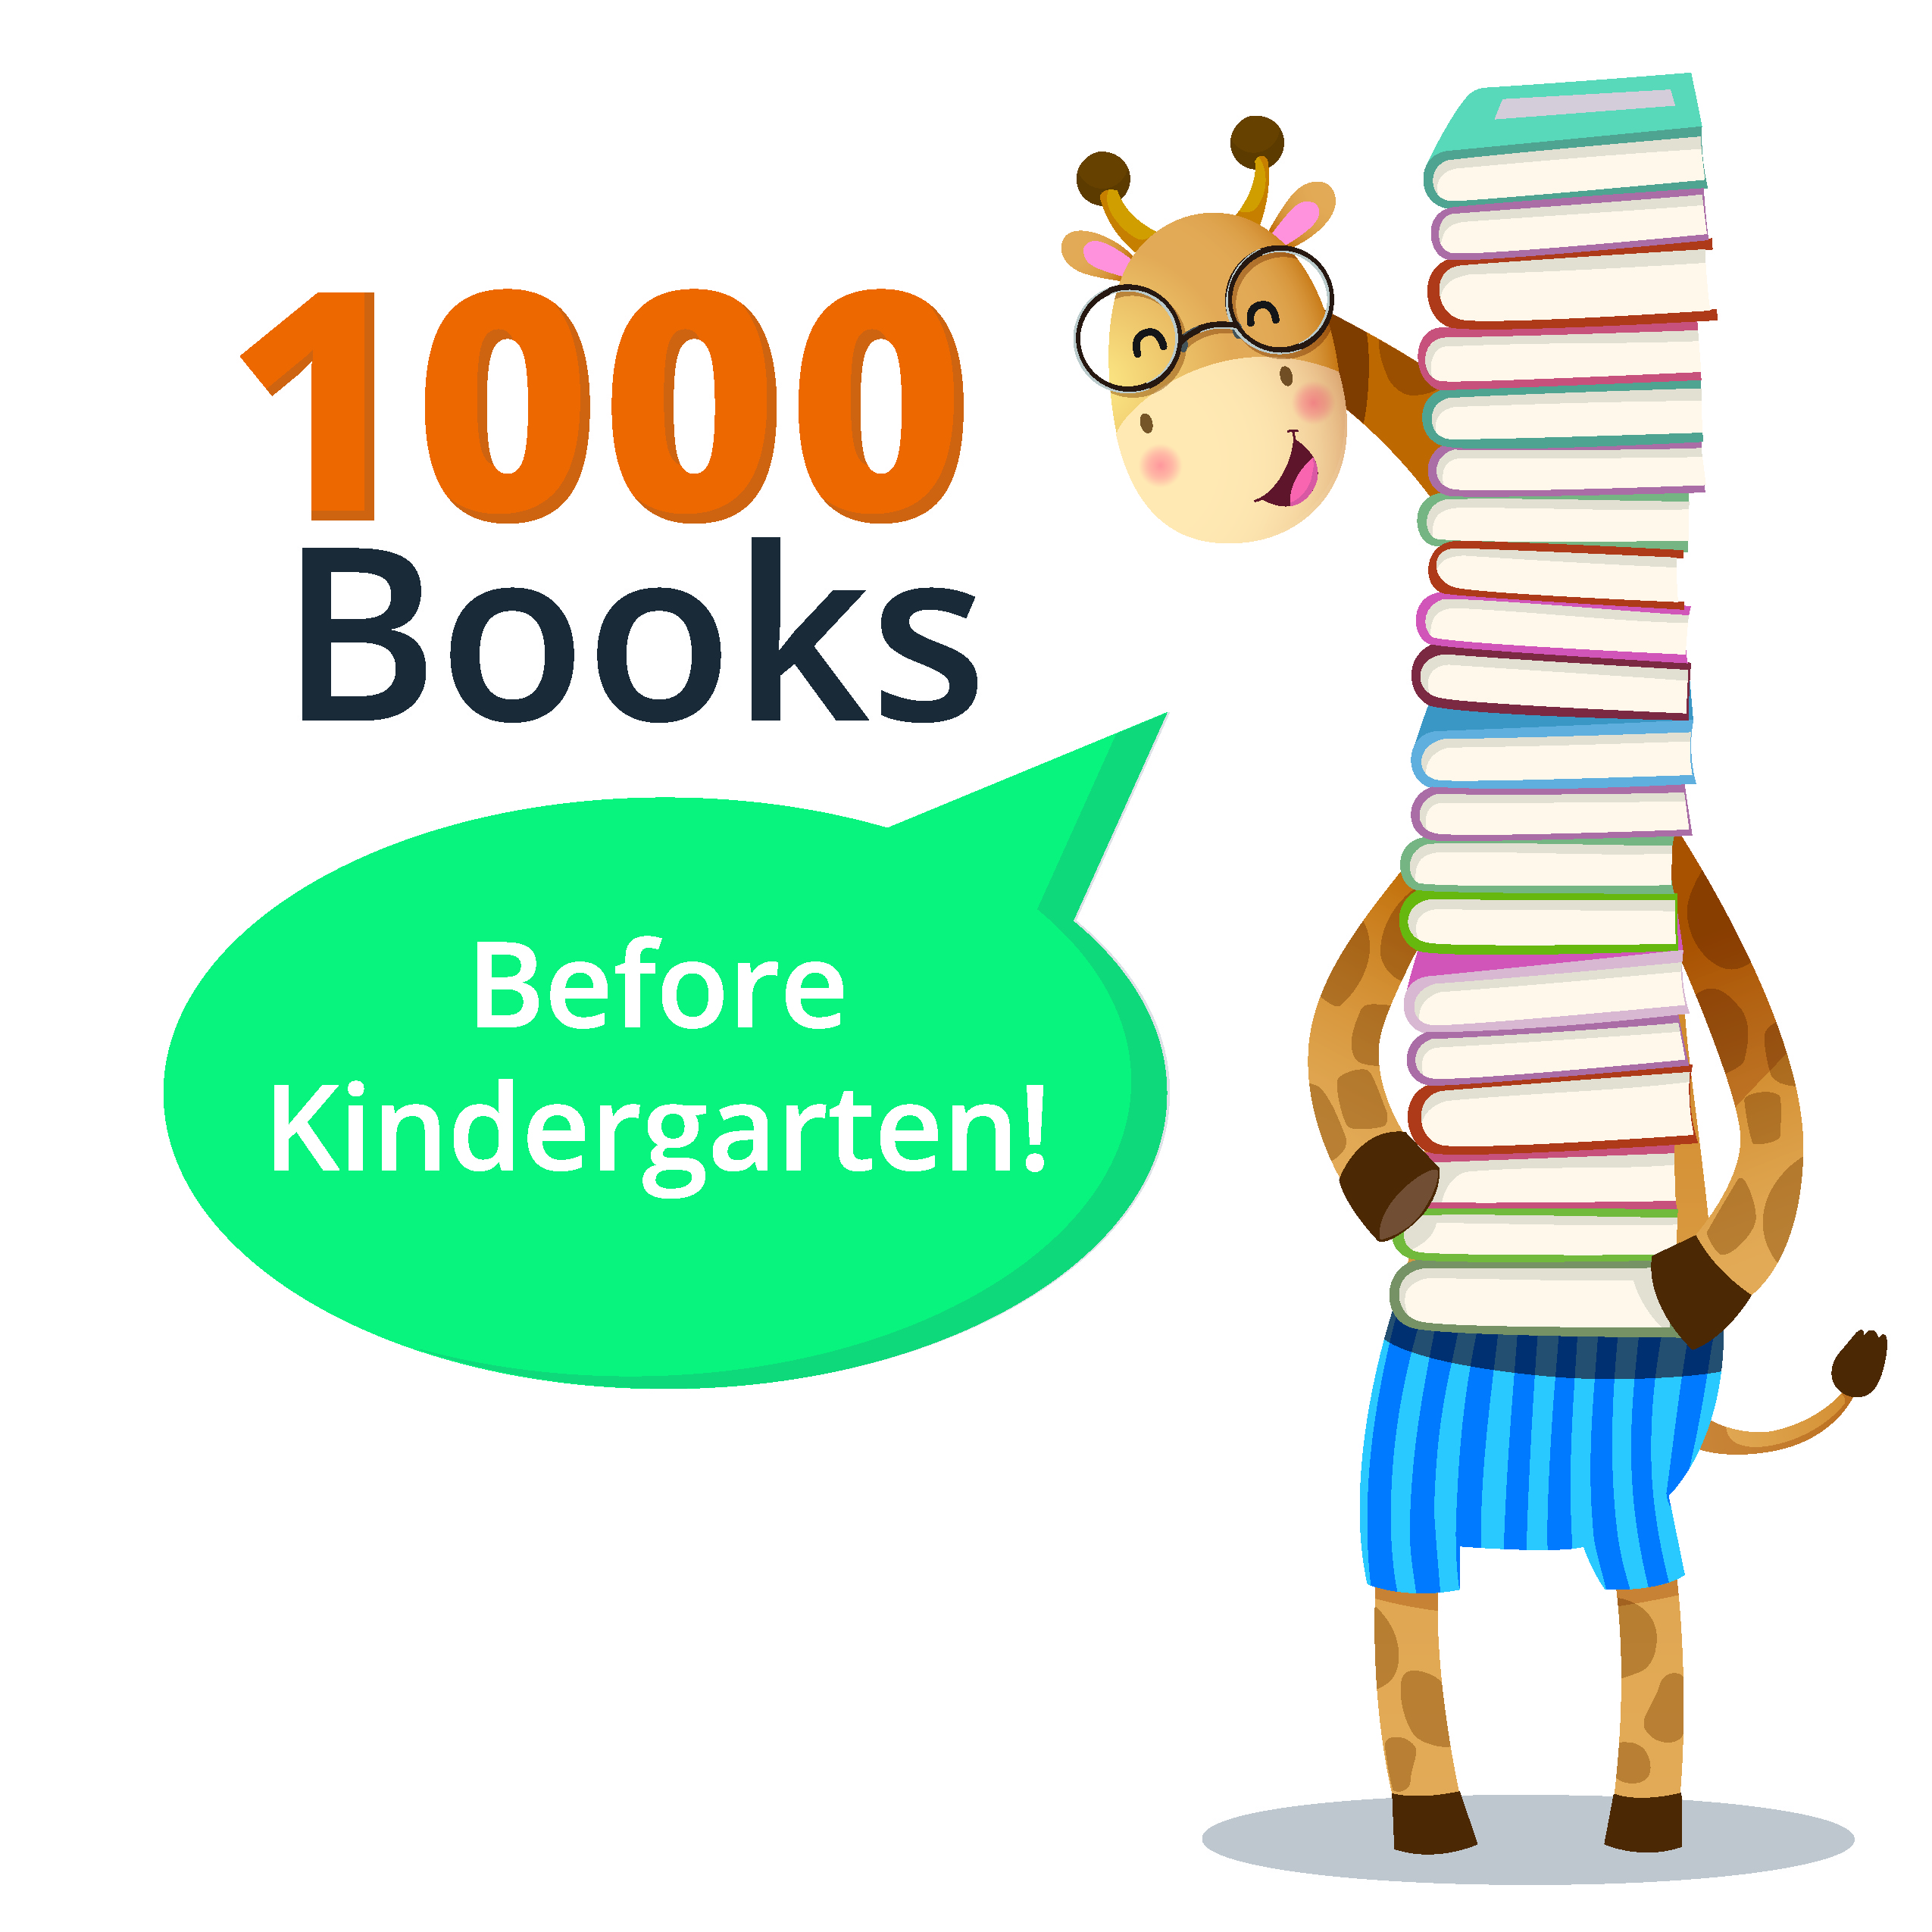 Giraffe in blue shorts holding a large stack of books